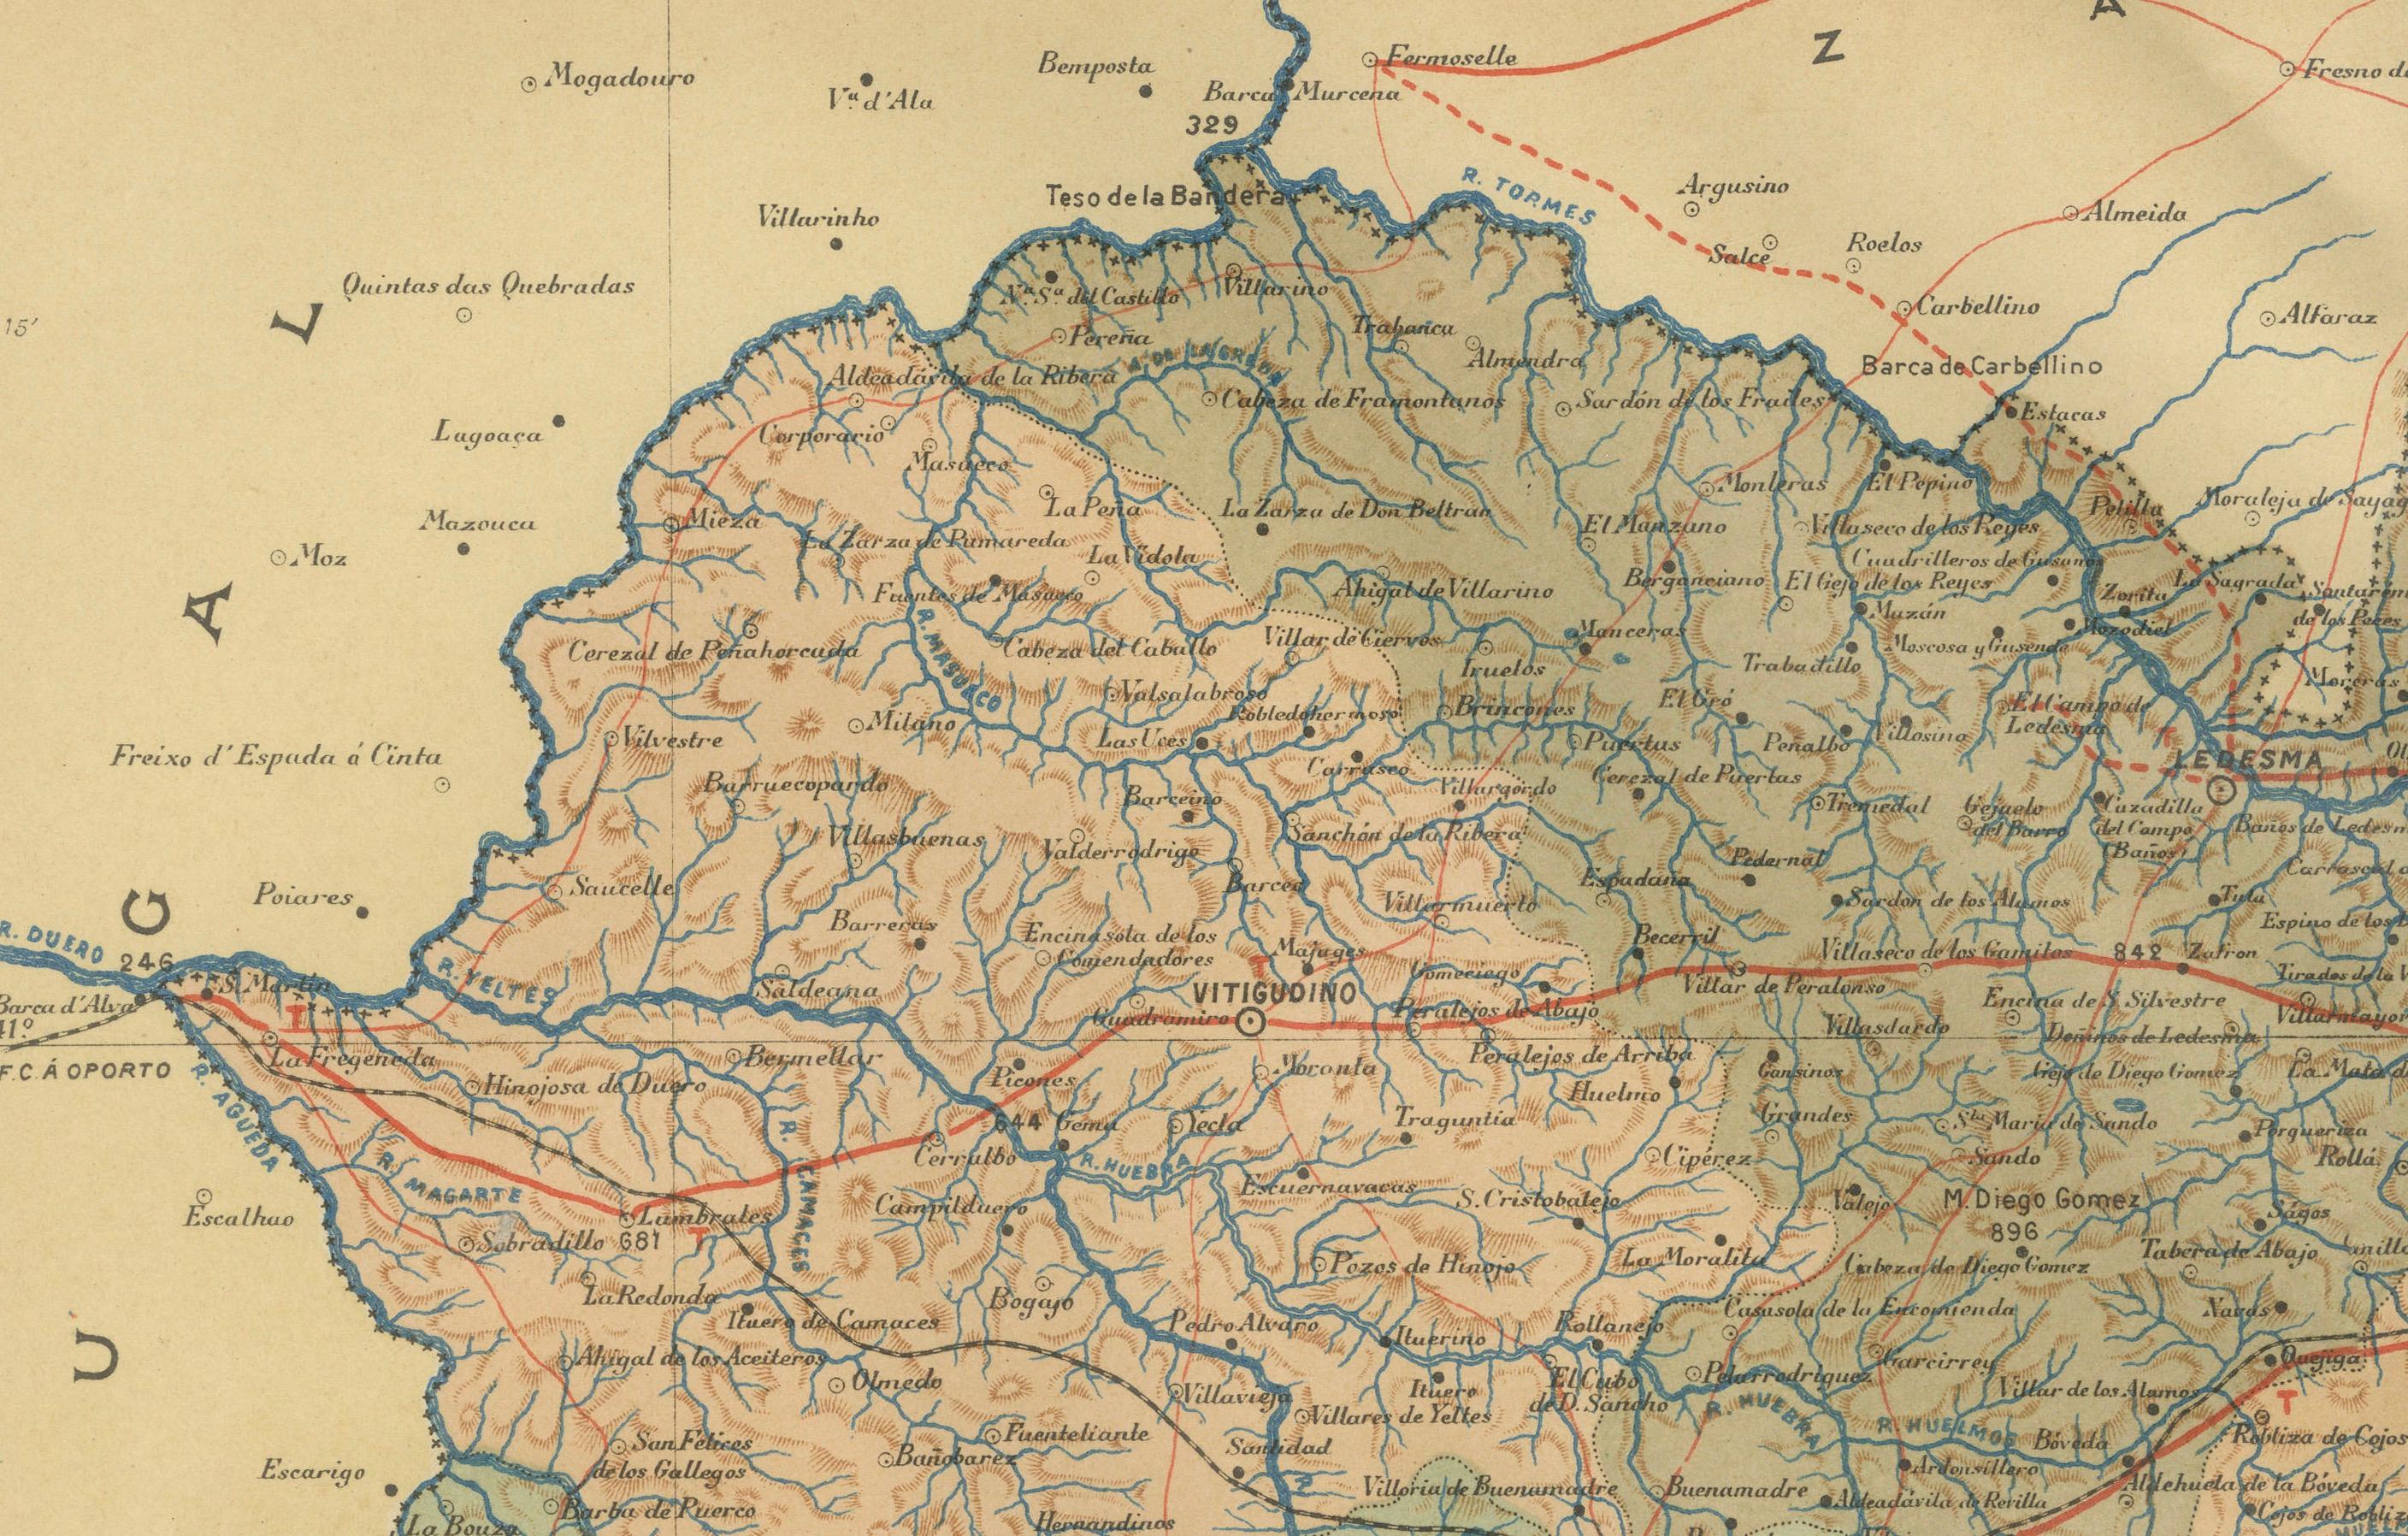 This map showcases the province of Salamanca in the year 1902. Salamanca is located in the autonomous community of Castile and León in western Spain. It is bordered by the provinces of Zamora, Valladolid, Ávila, and Cáceres, and is situated close to